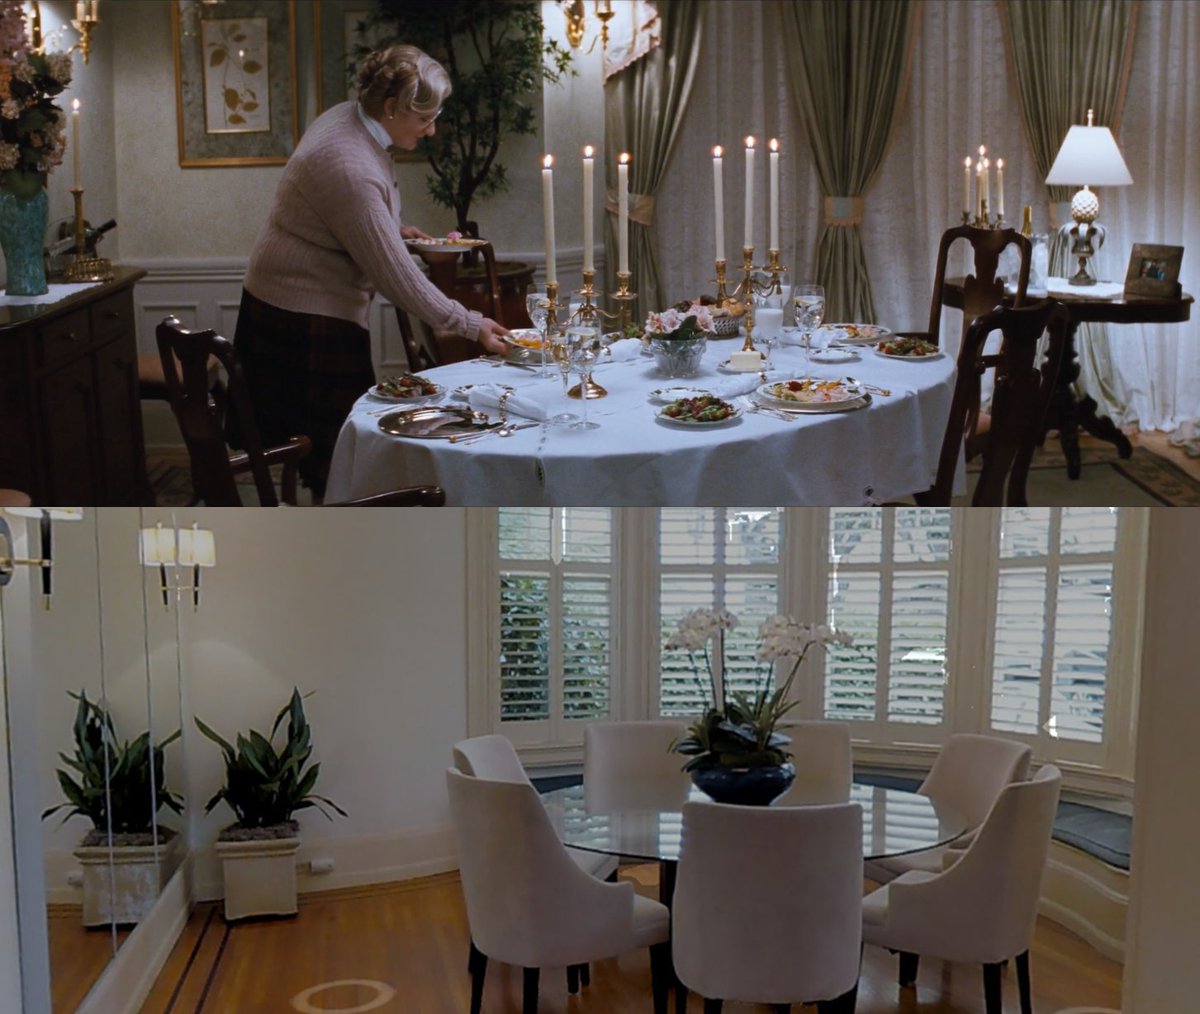 [Miranda's viewpoint, in which we see both Mrs. Doubtfire and a style of 90s décor I can't say I love, but miss when looking at what's there now]